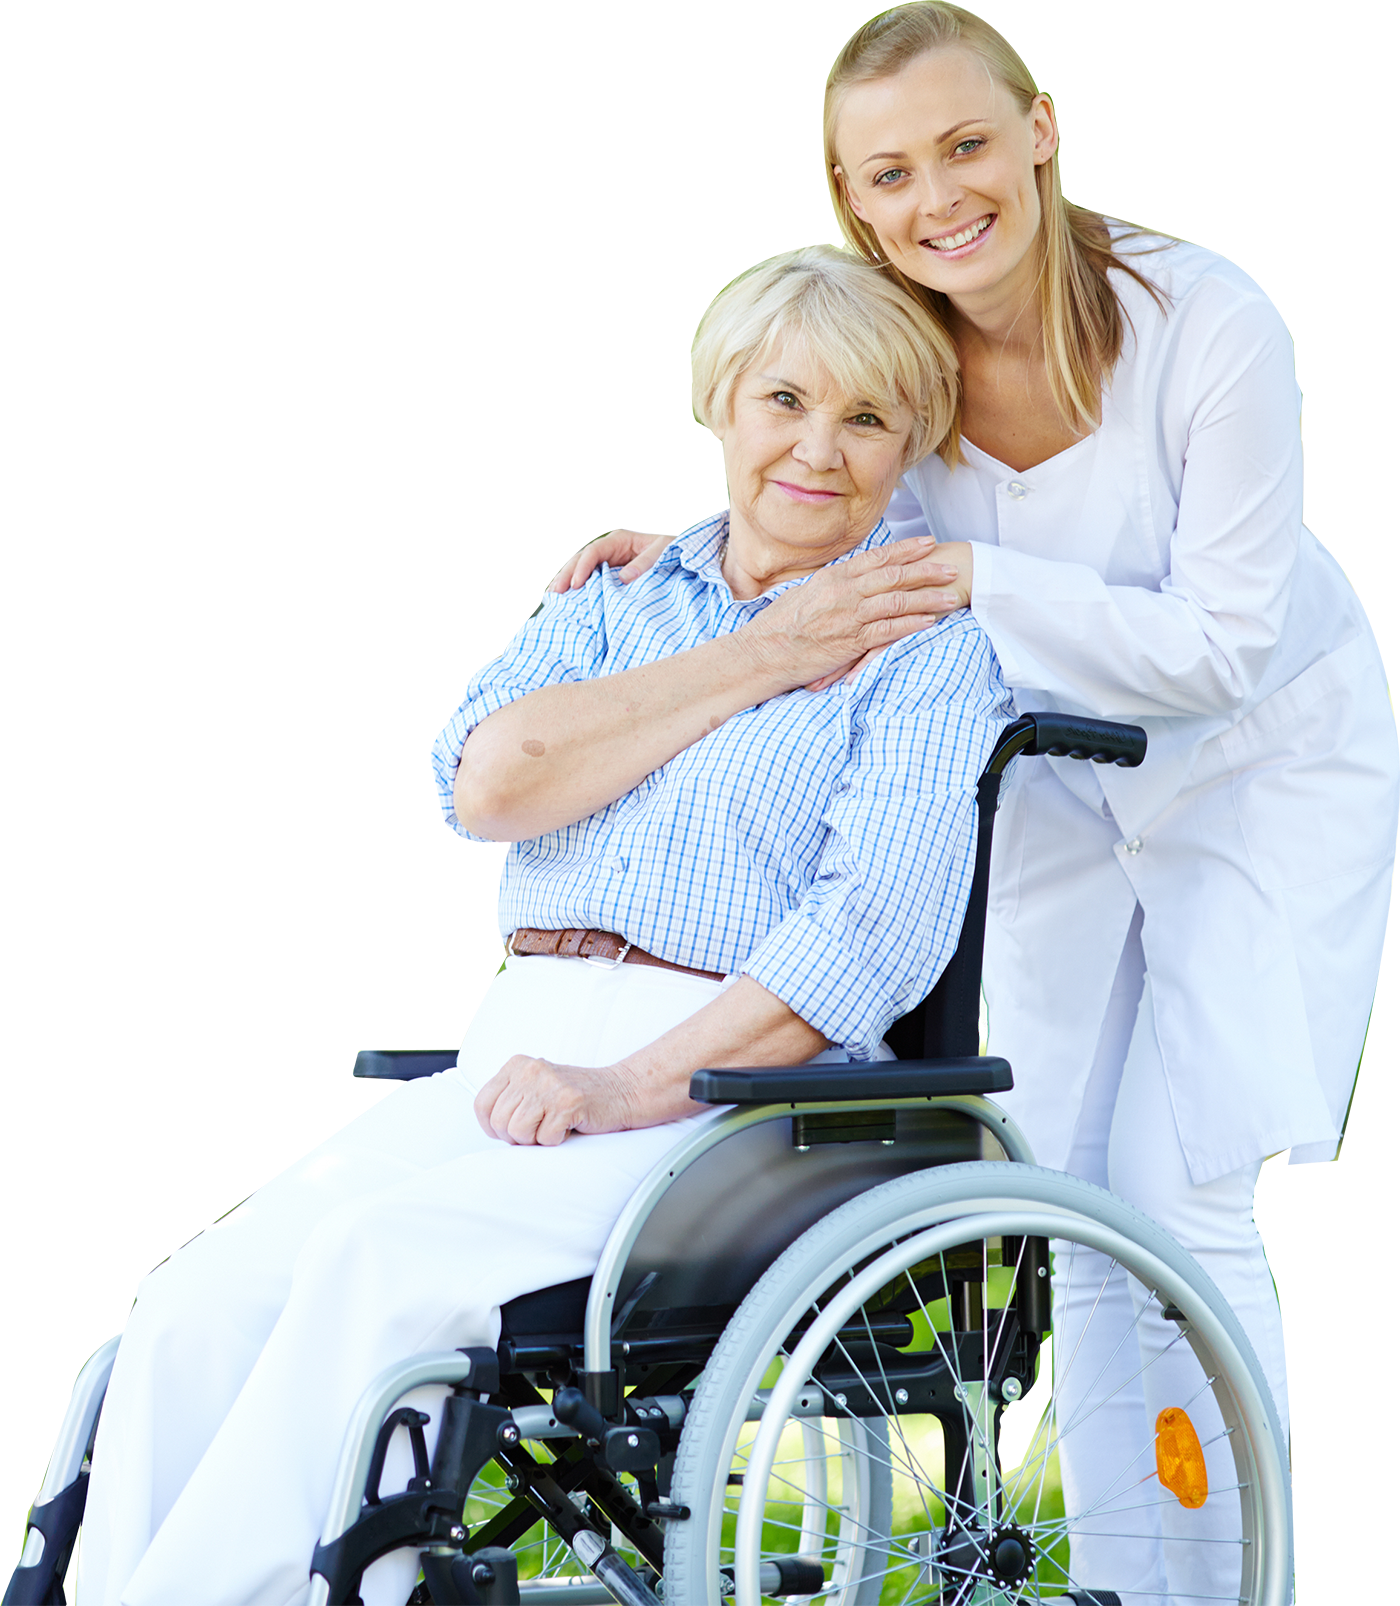 Honeybee Homecare carer offering personal domiciliary care in Warwickshire